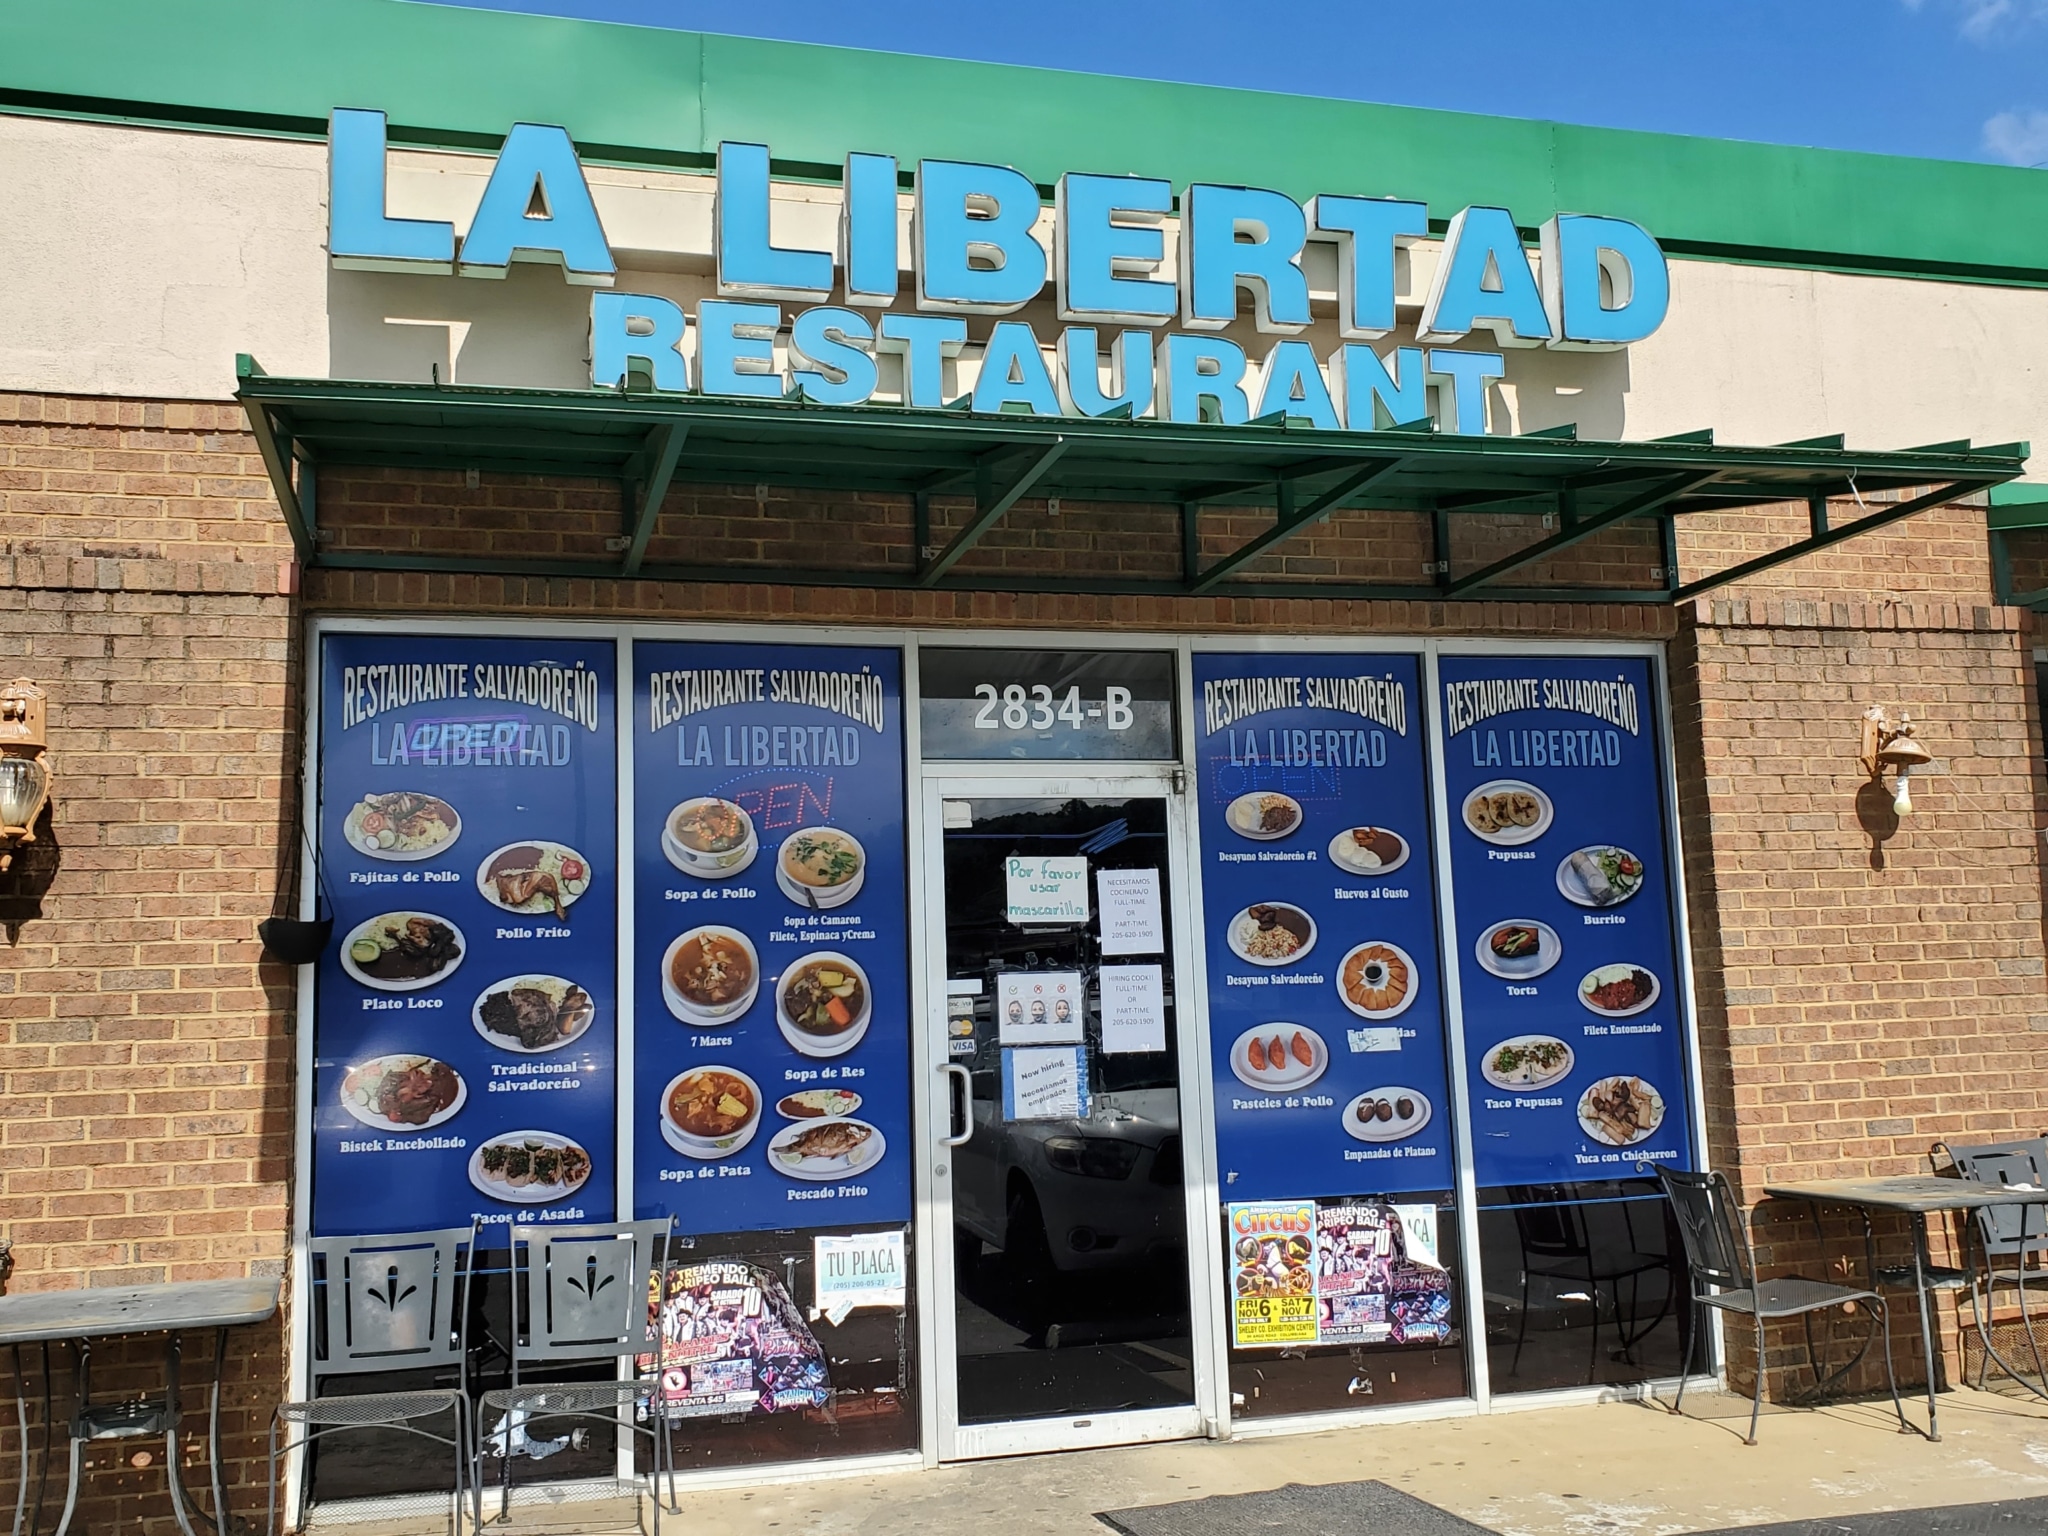 La Libertad storefront with pictures of menu items